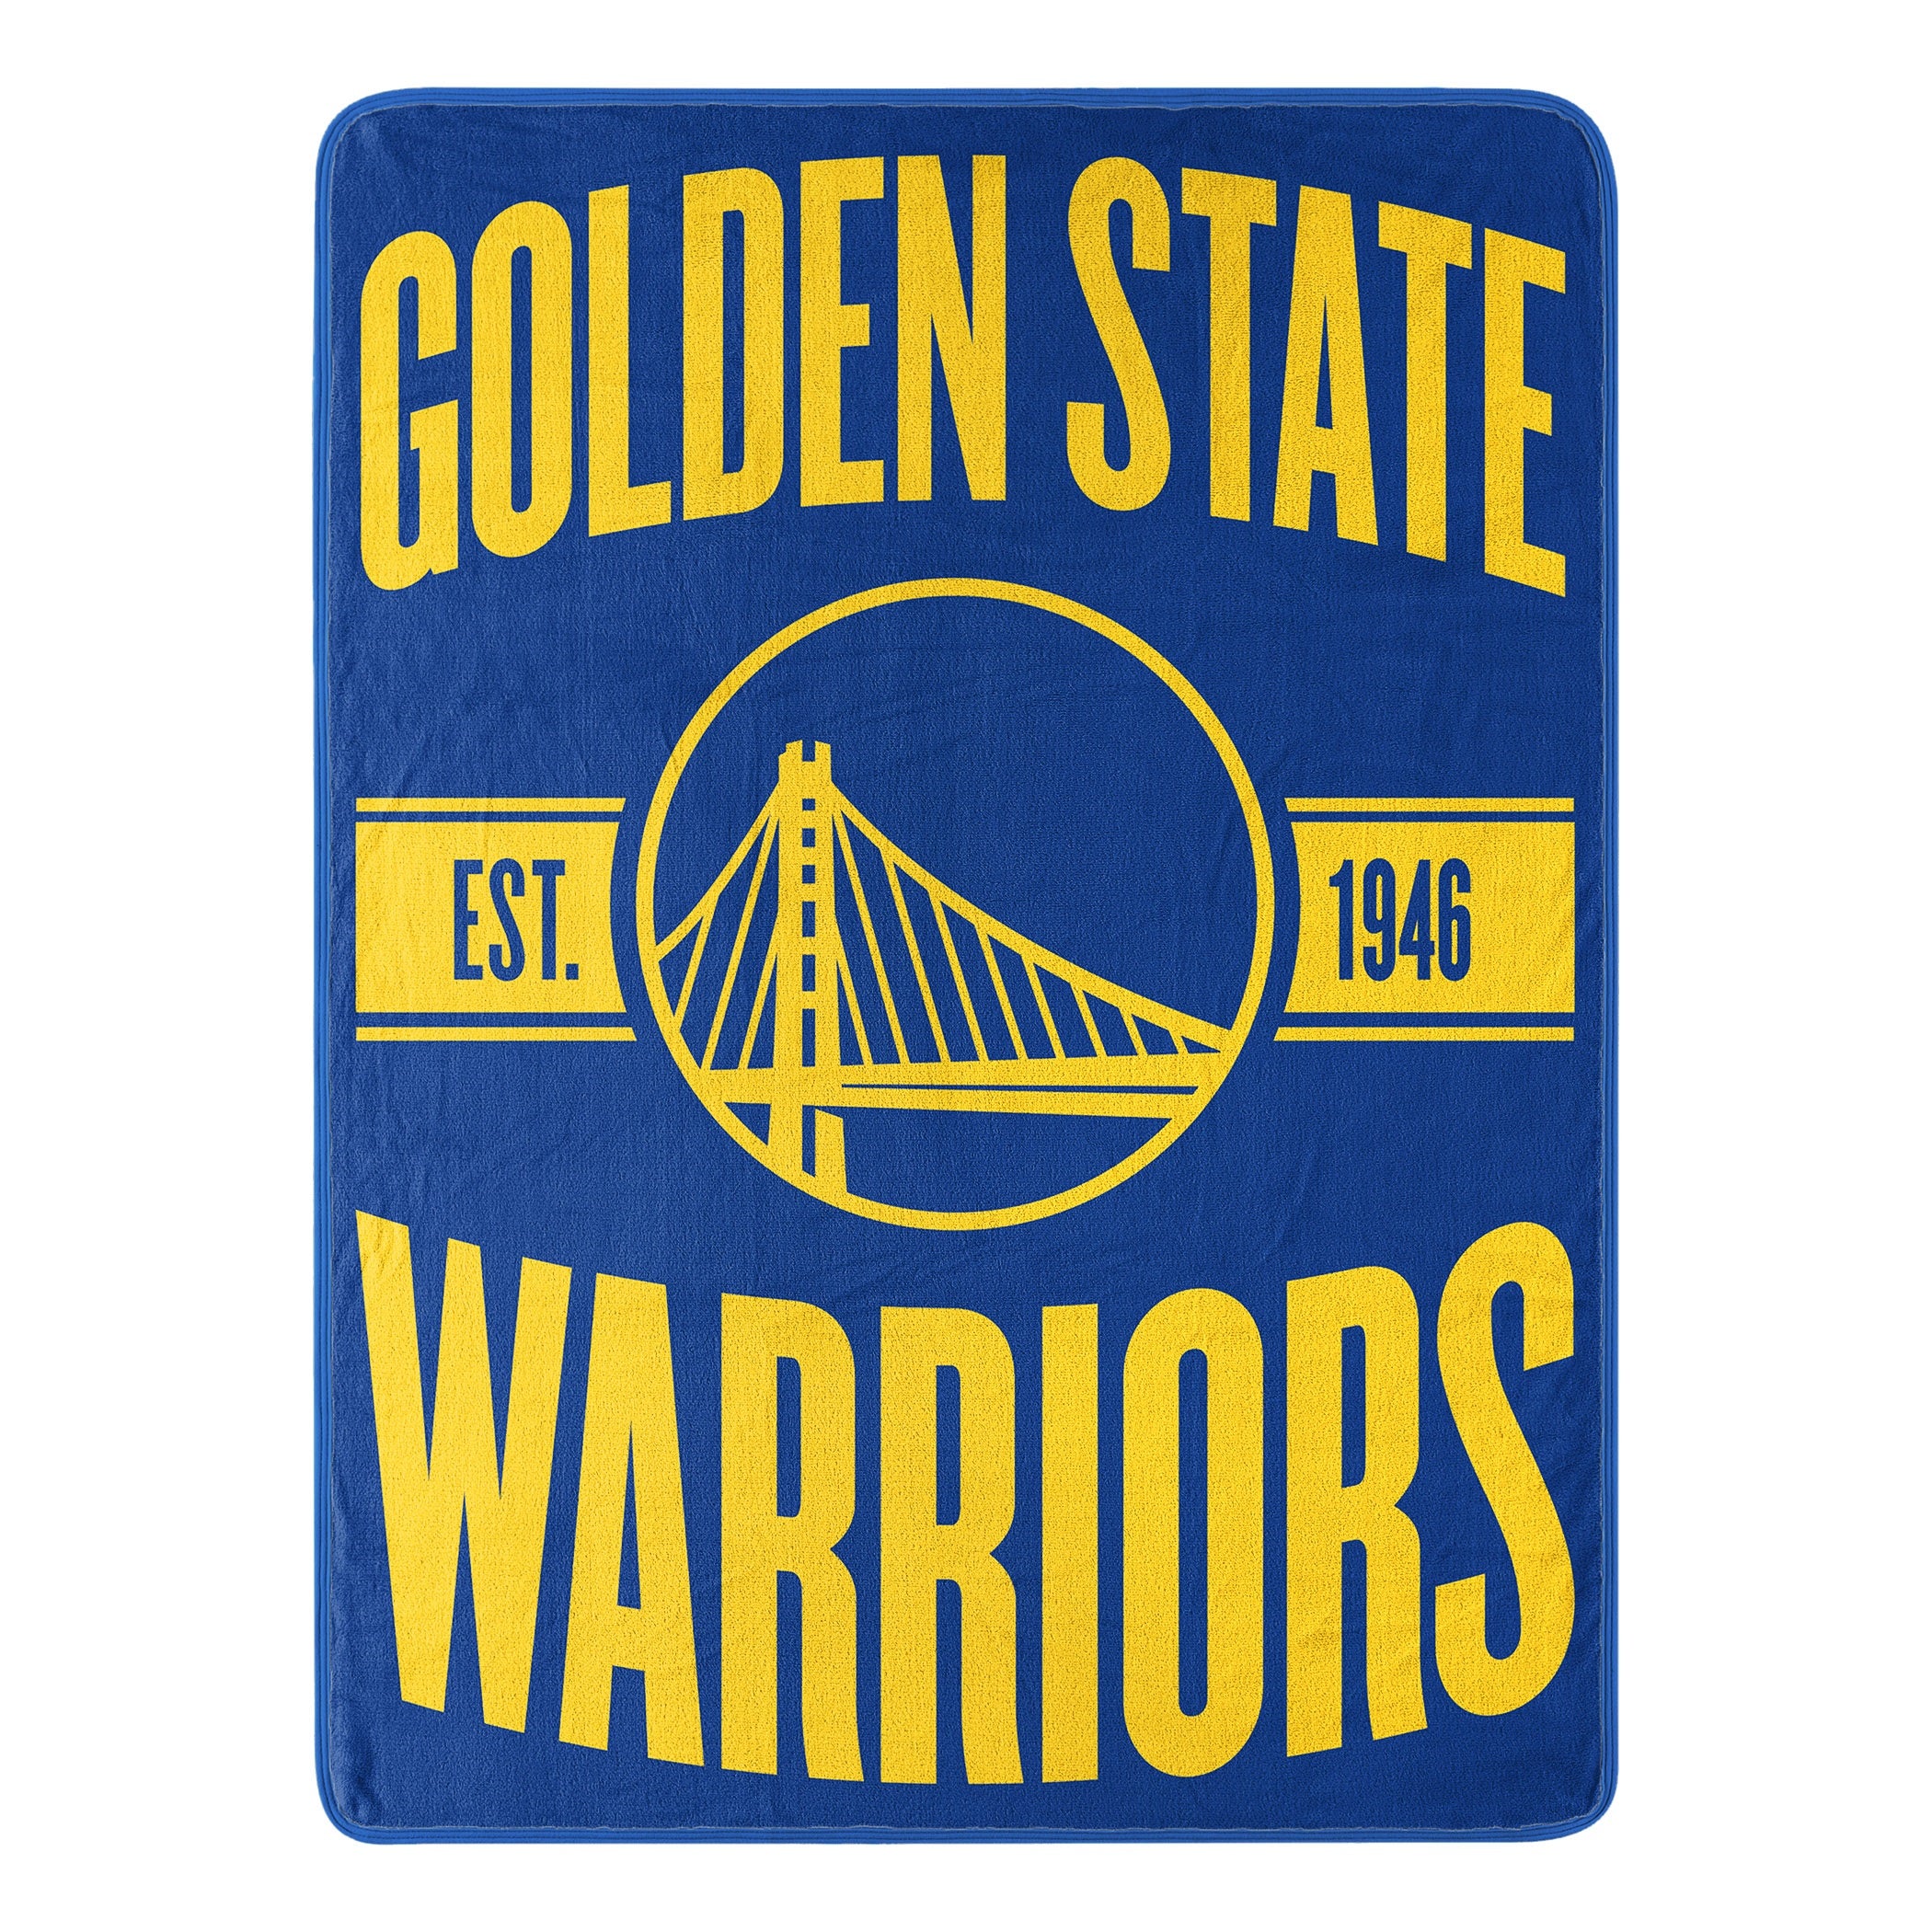 Golden State Warriors Blanket 46x60 Micro Raschel Clear Out Design Rolled